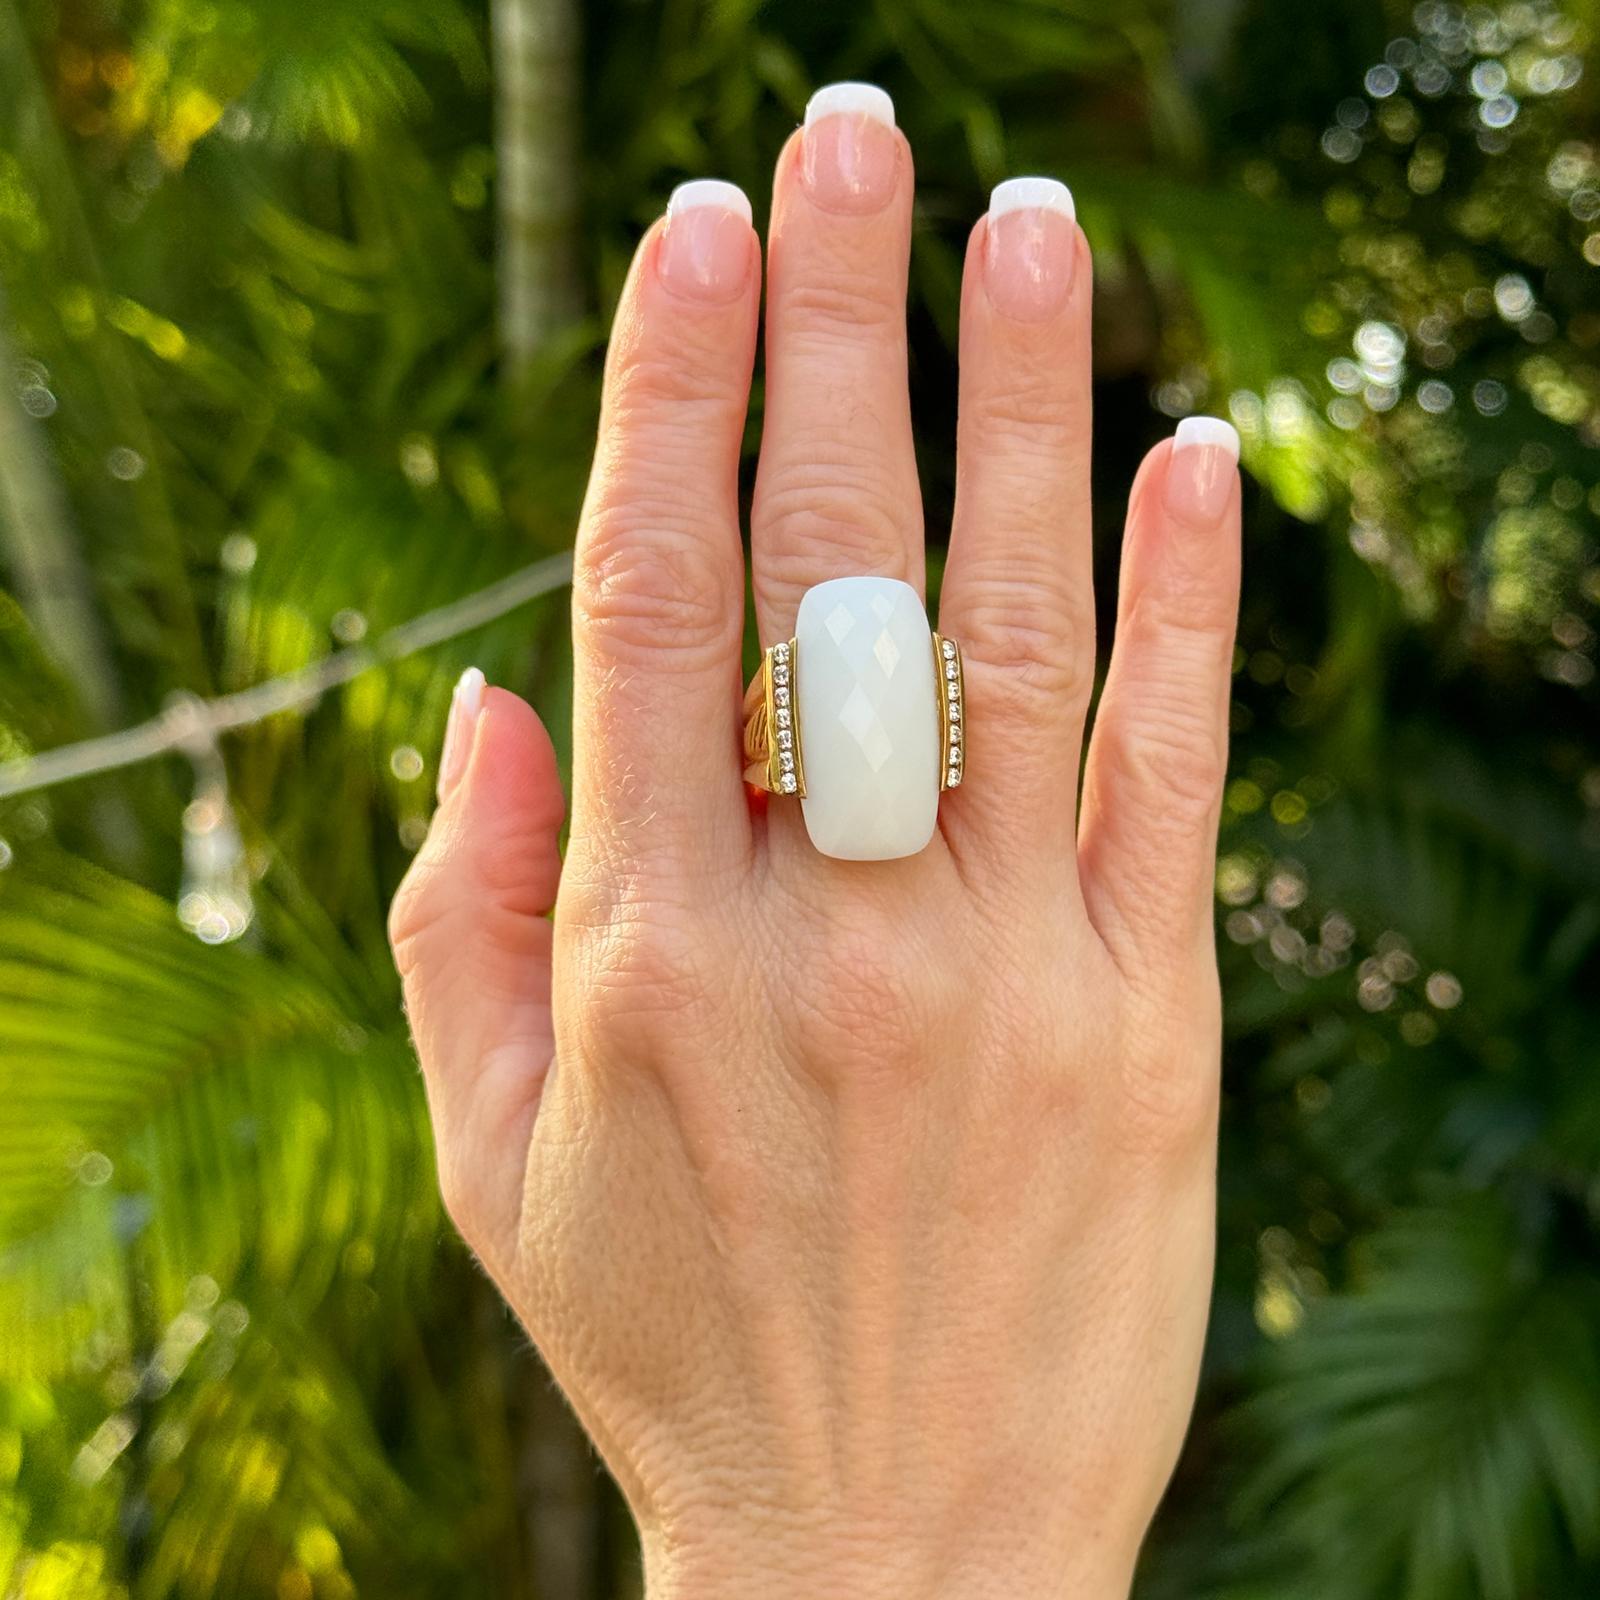 Sugarloaf Cabochon David Yurman Faceted White Agate Diamond 18 Karat Yellow Gold Cocktail Ring For Sale